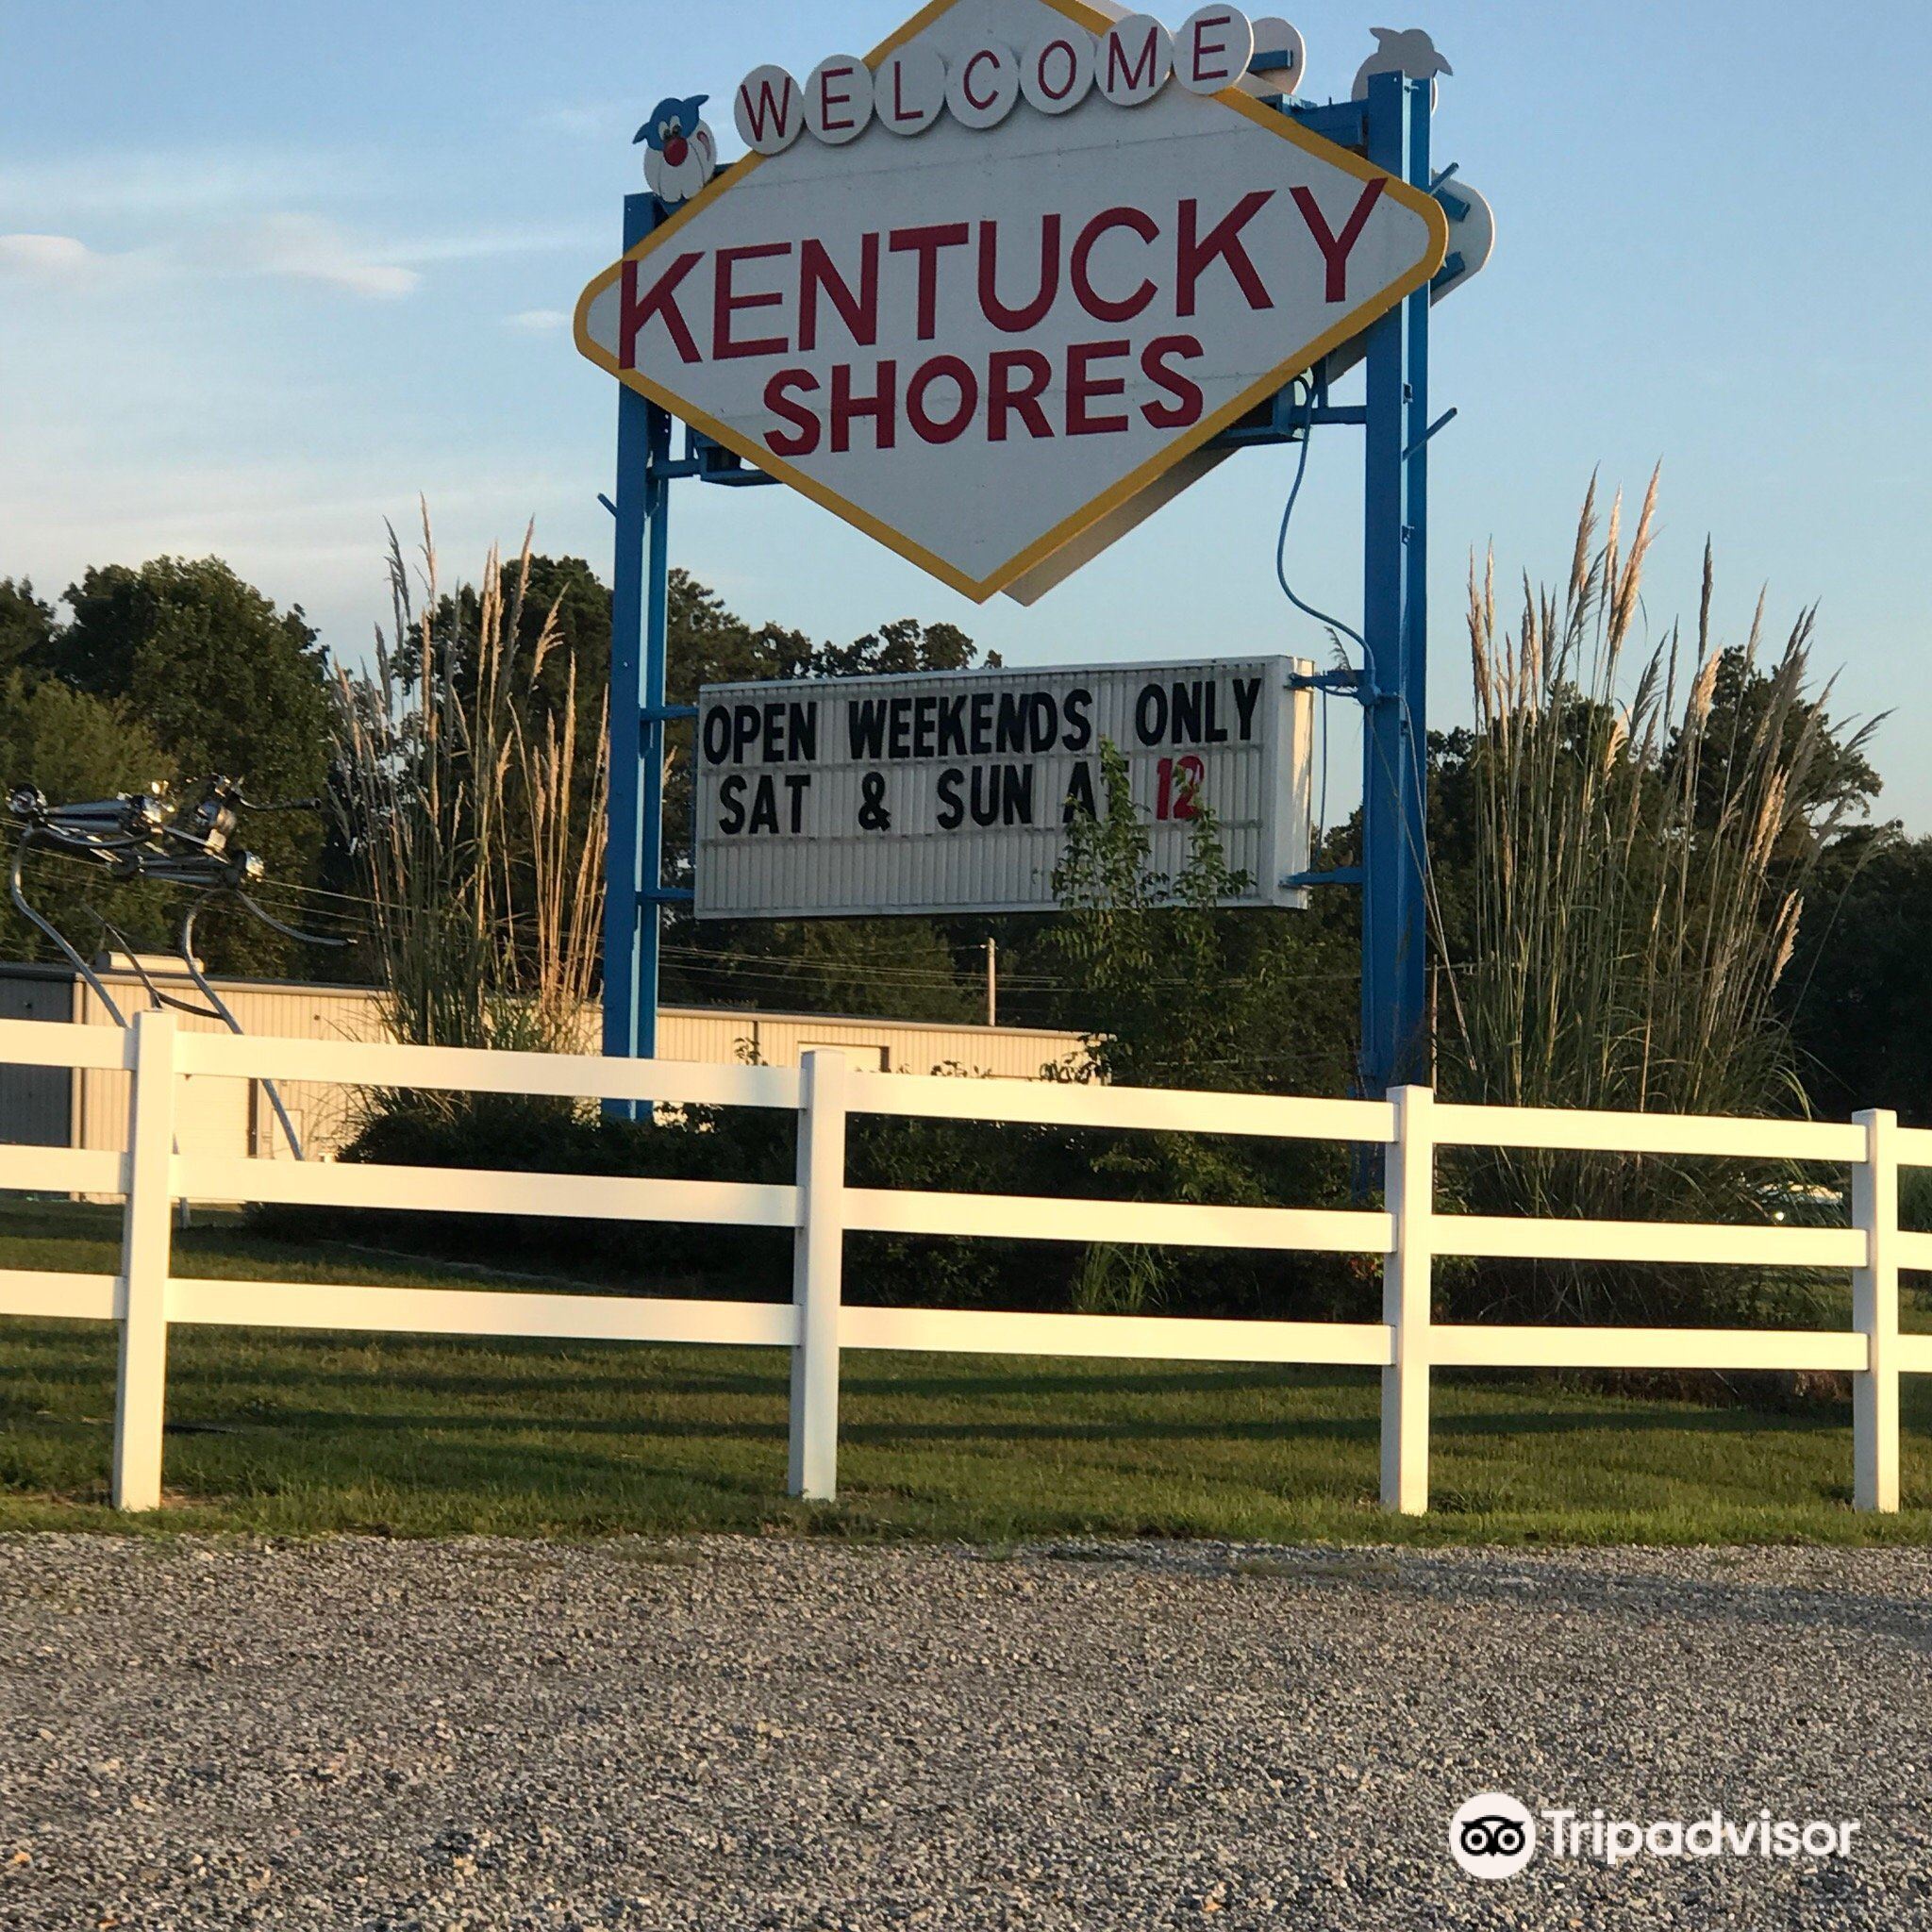 Kentucky Shores Family Fun Center attraction reviews - Kentucky Shores Family Fun Center tickets - Kentucky Shores Family Fun Center discounts - Kentucky Shores Family Fun Center transportation, address, opening hours -